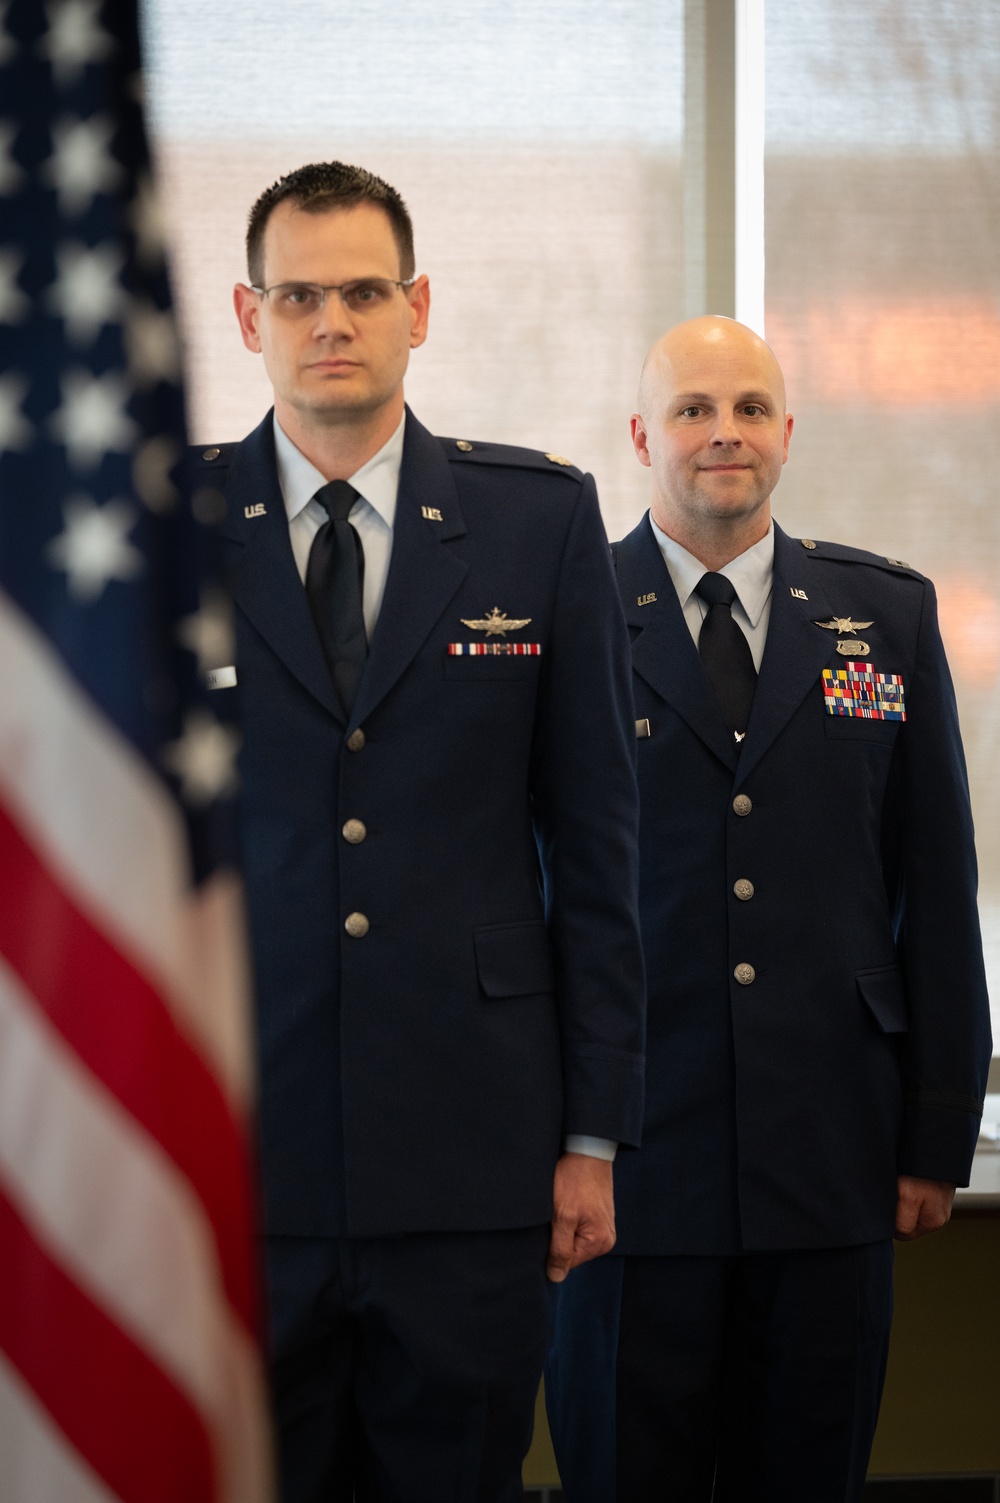 155th Communications Squadron Change of Command